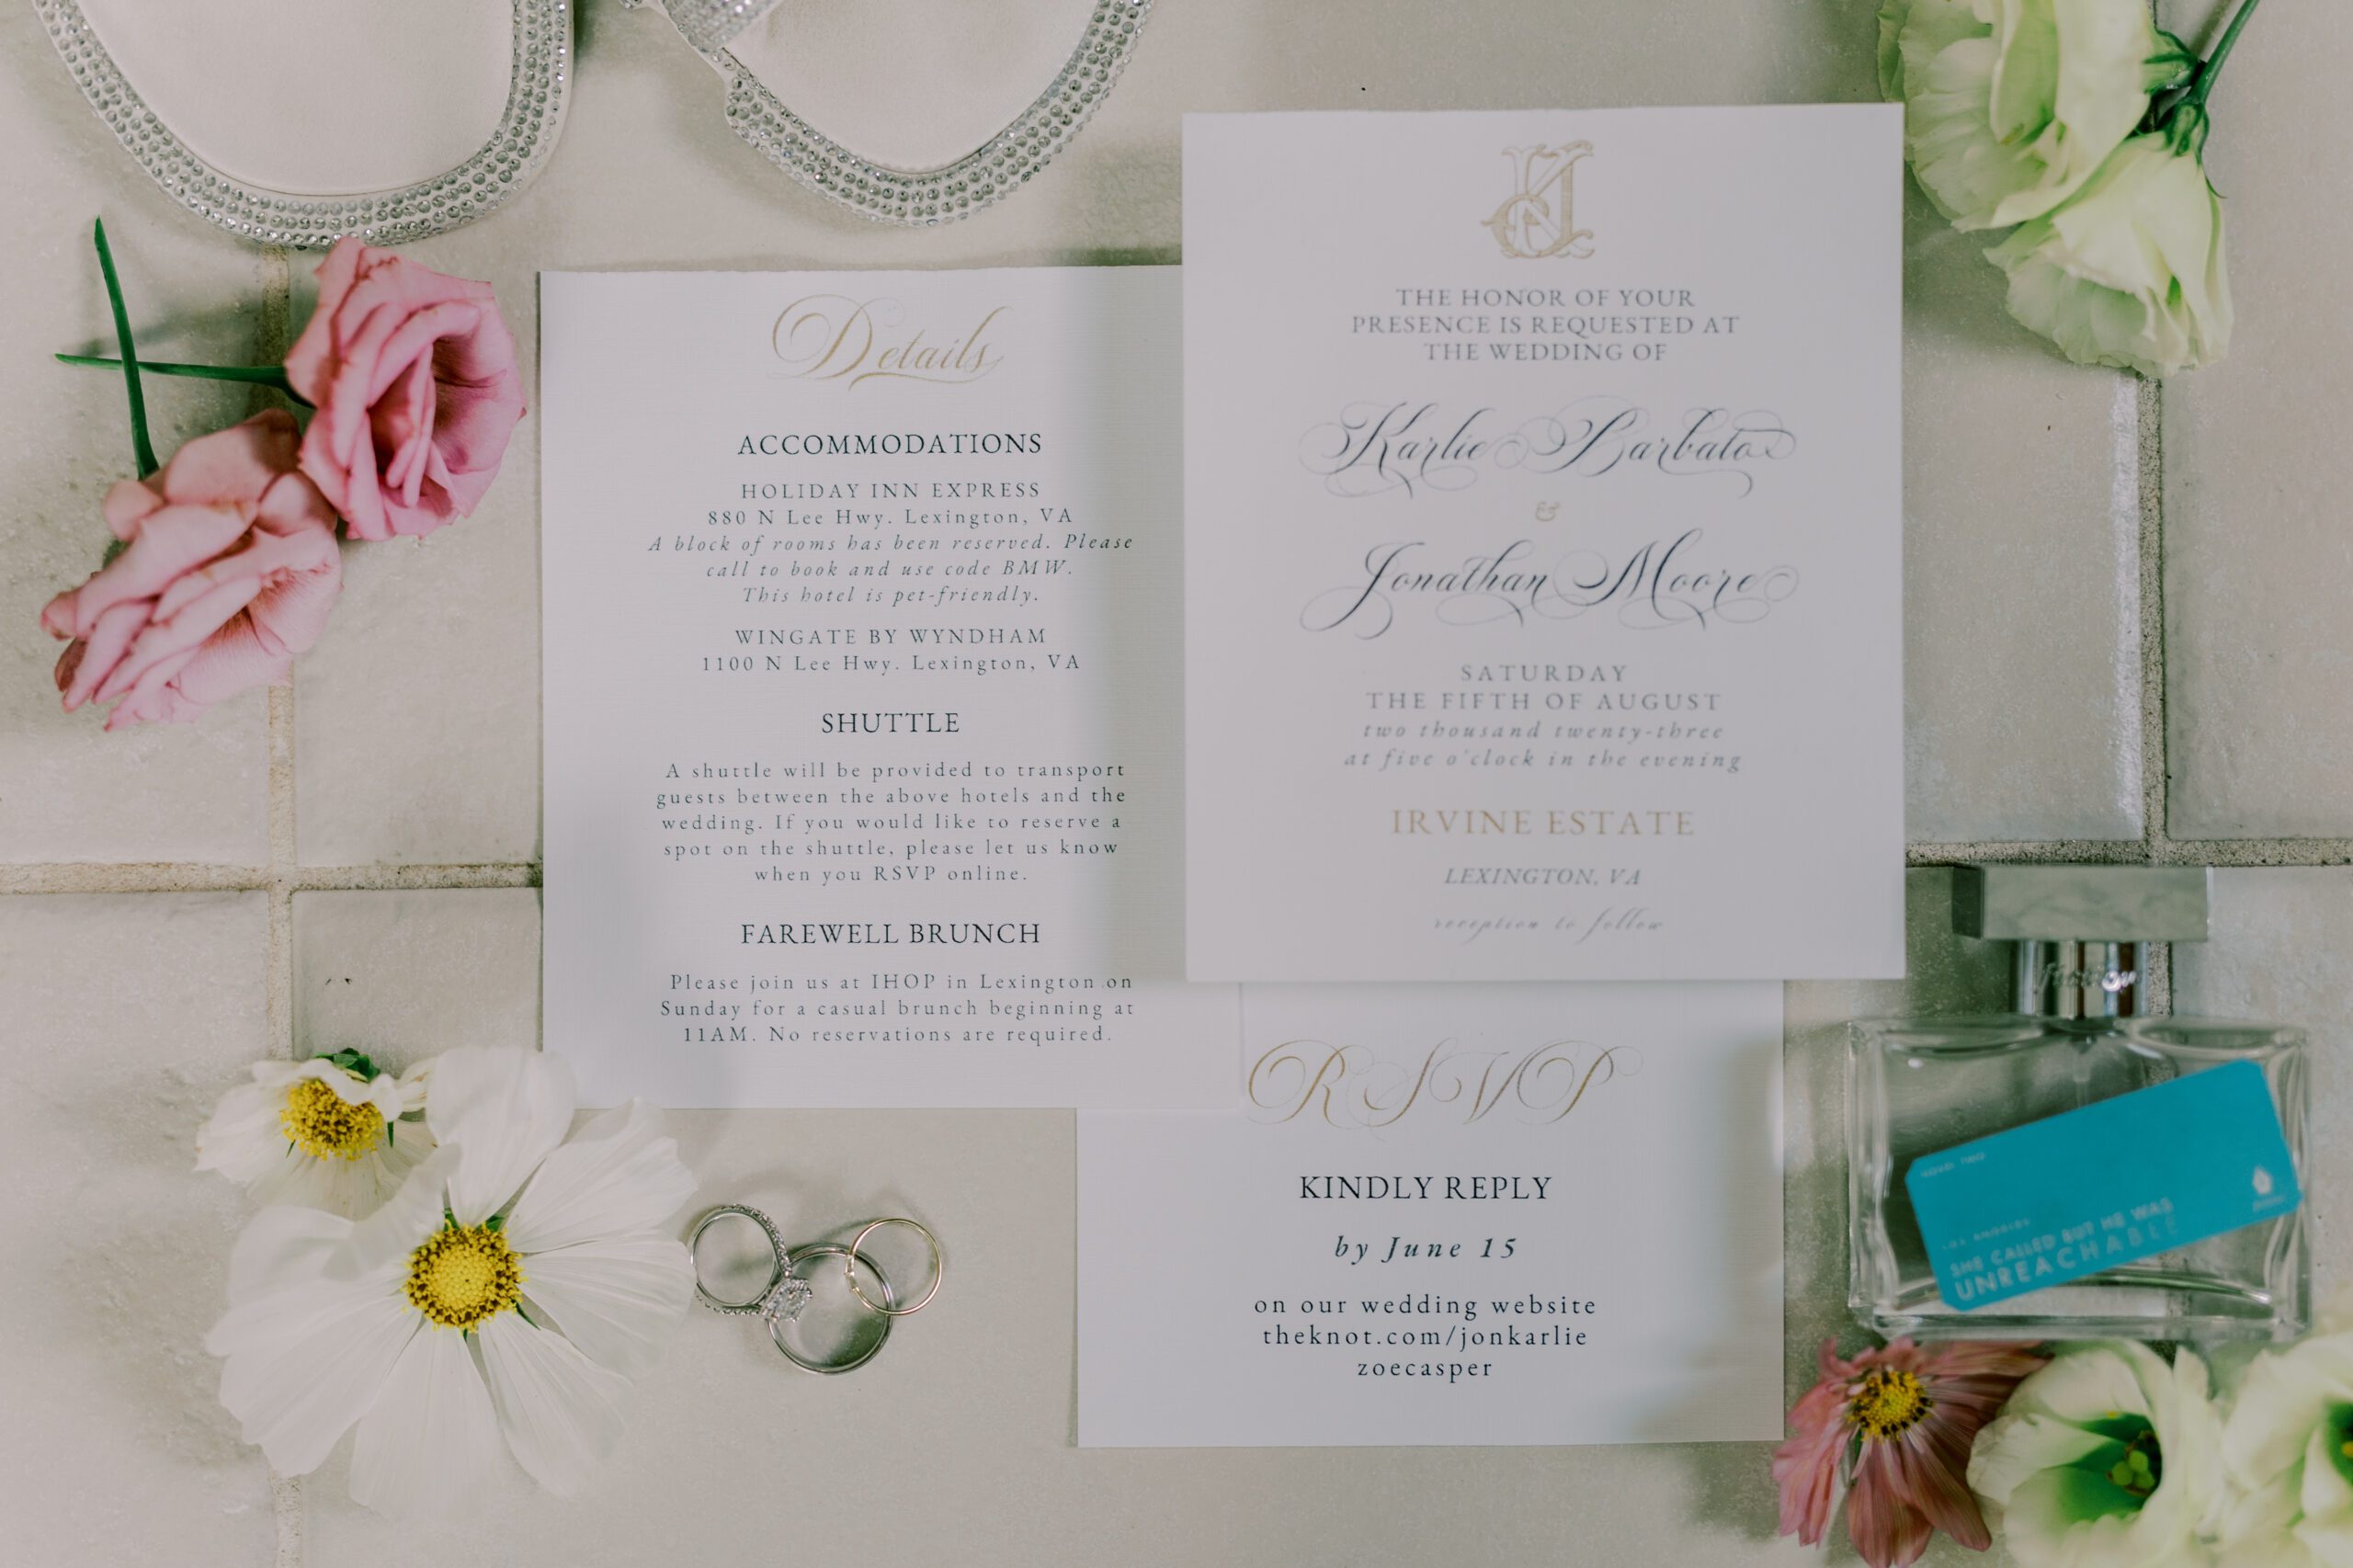 Detail photo of wedding invitation, detail page and rsvp card, florals, perfume and jewelry placed around them